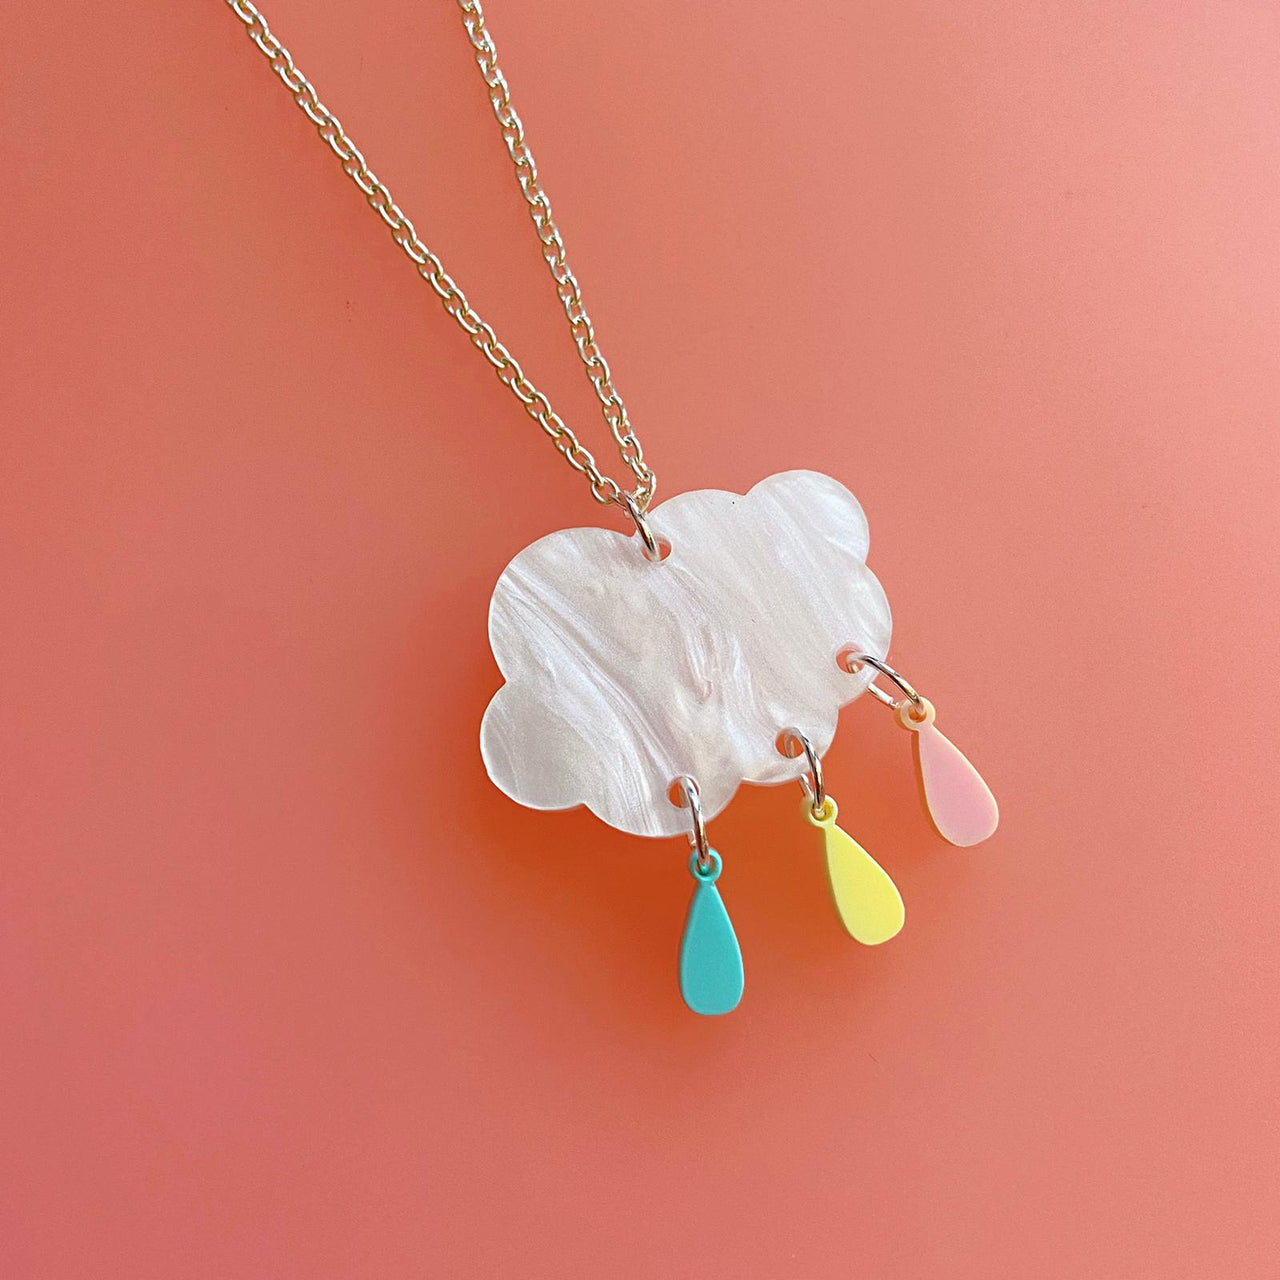 Silver Linings Cloud Necklace with Pastel Raindrops